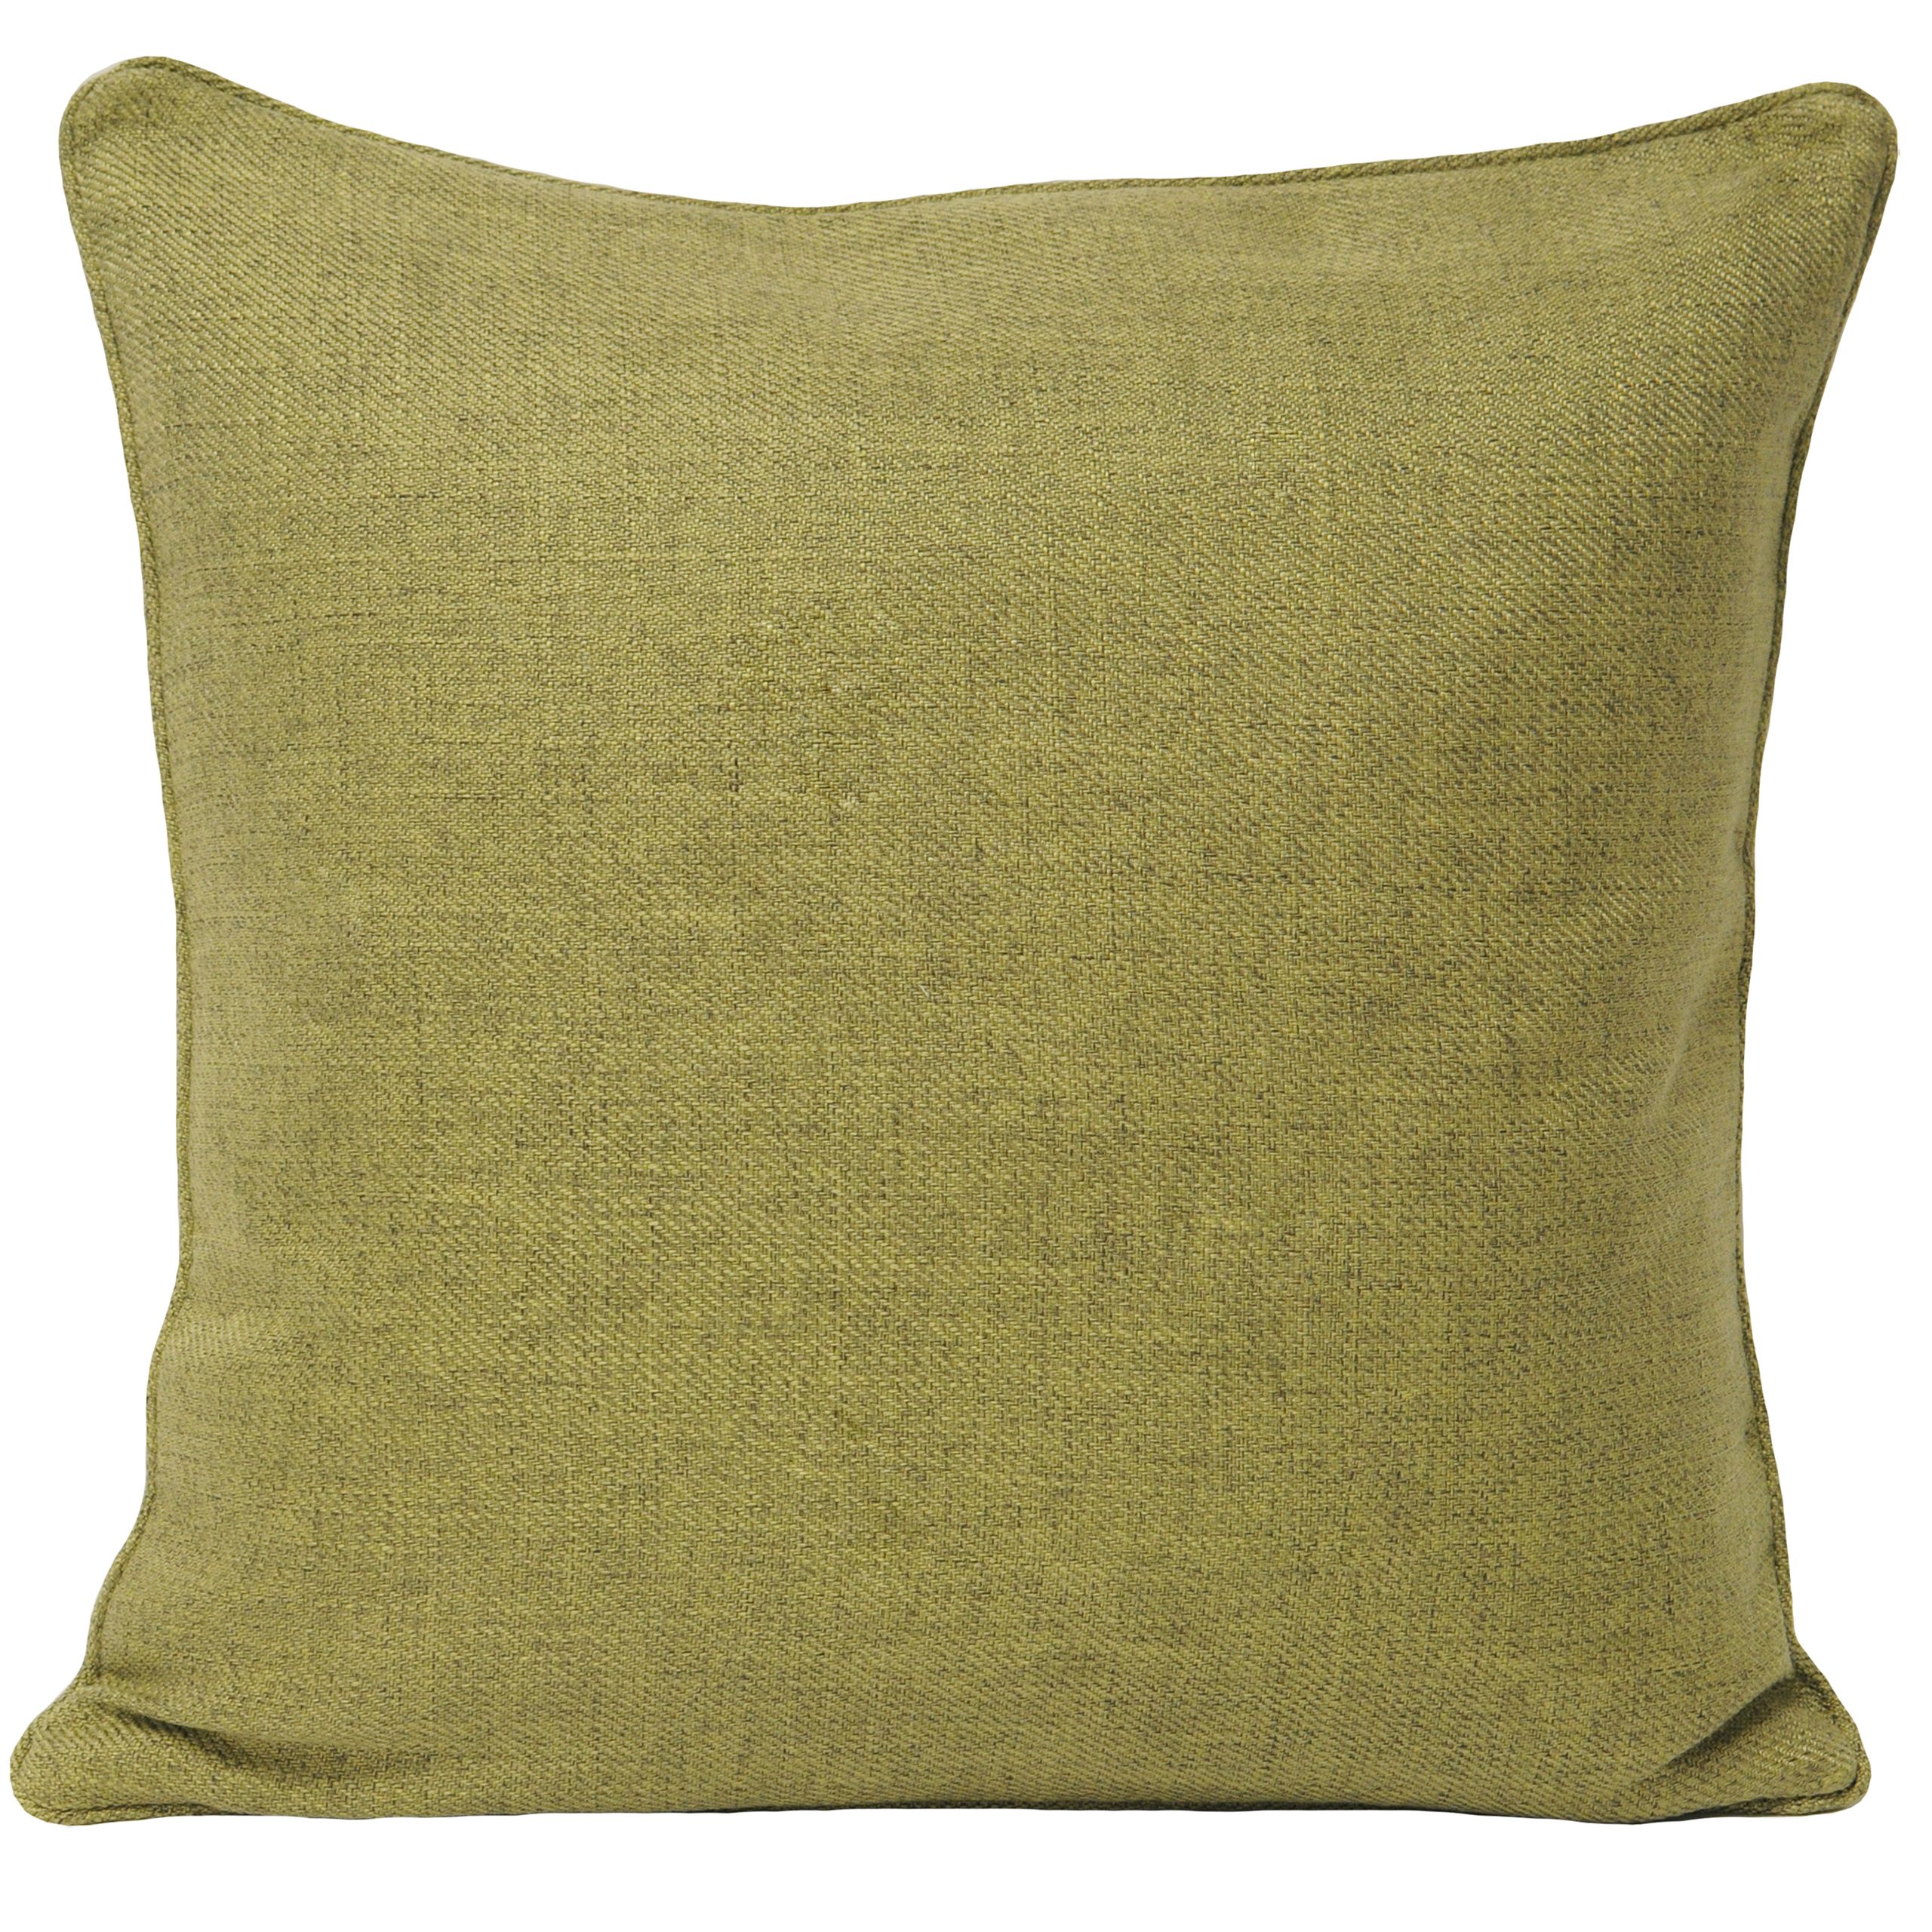 The Atlantic cushions feature a plain reversible design and are made of soft woven twill fabric which are available in a range of earthy tones. Made from 100% robust polyester these cushions are machine washable and hard-wearing. These cushions are designed to perfectly match with the Atlantic curtains and blinds whether you want a colour matching ensemble or dare to mix complimentary colours.